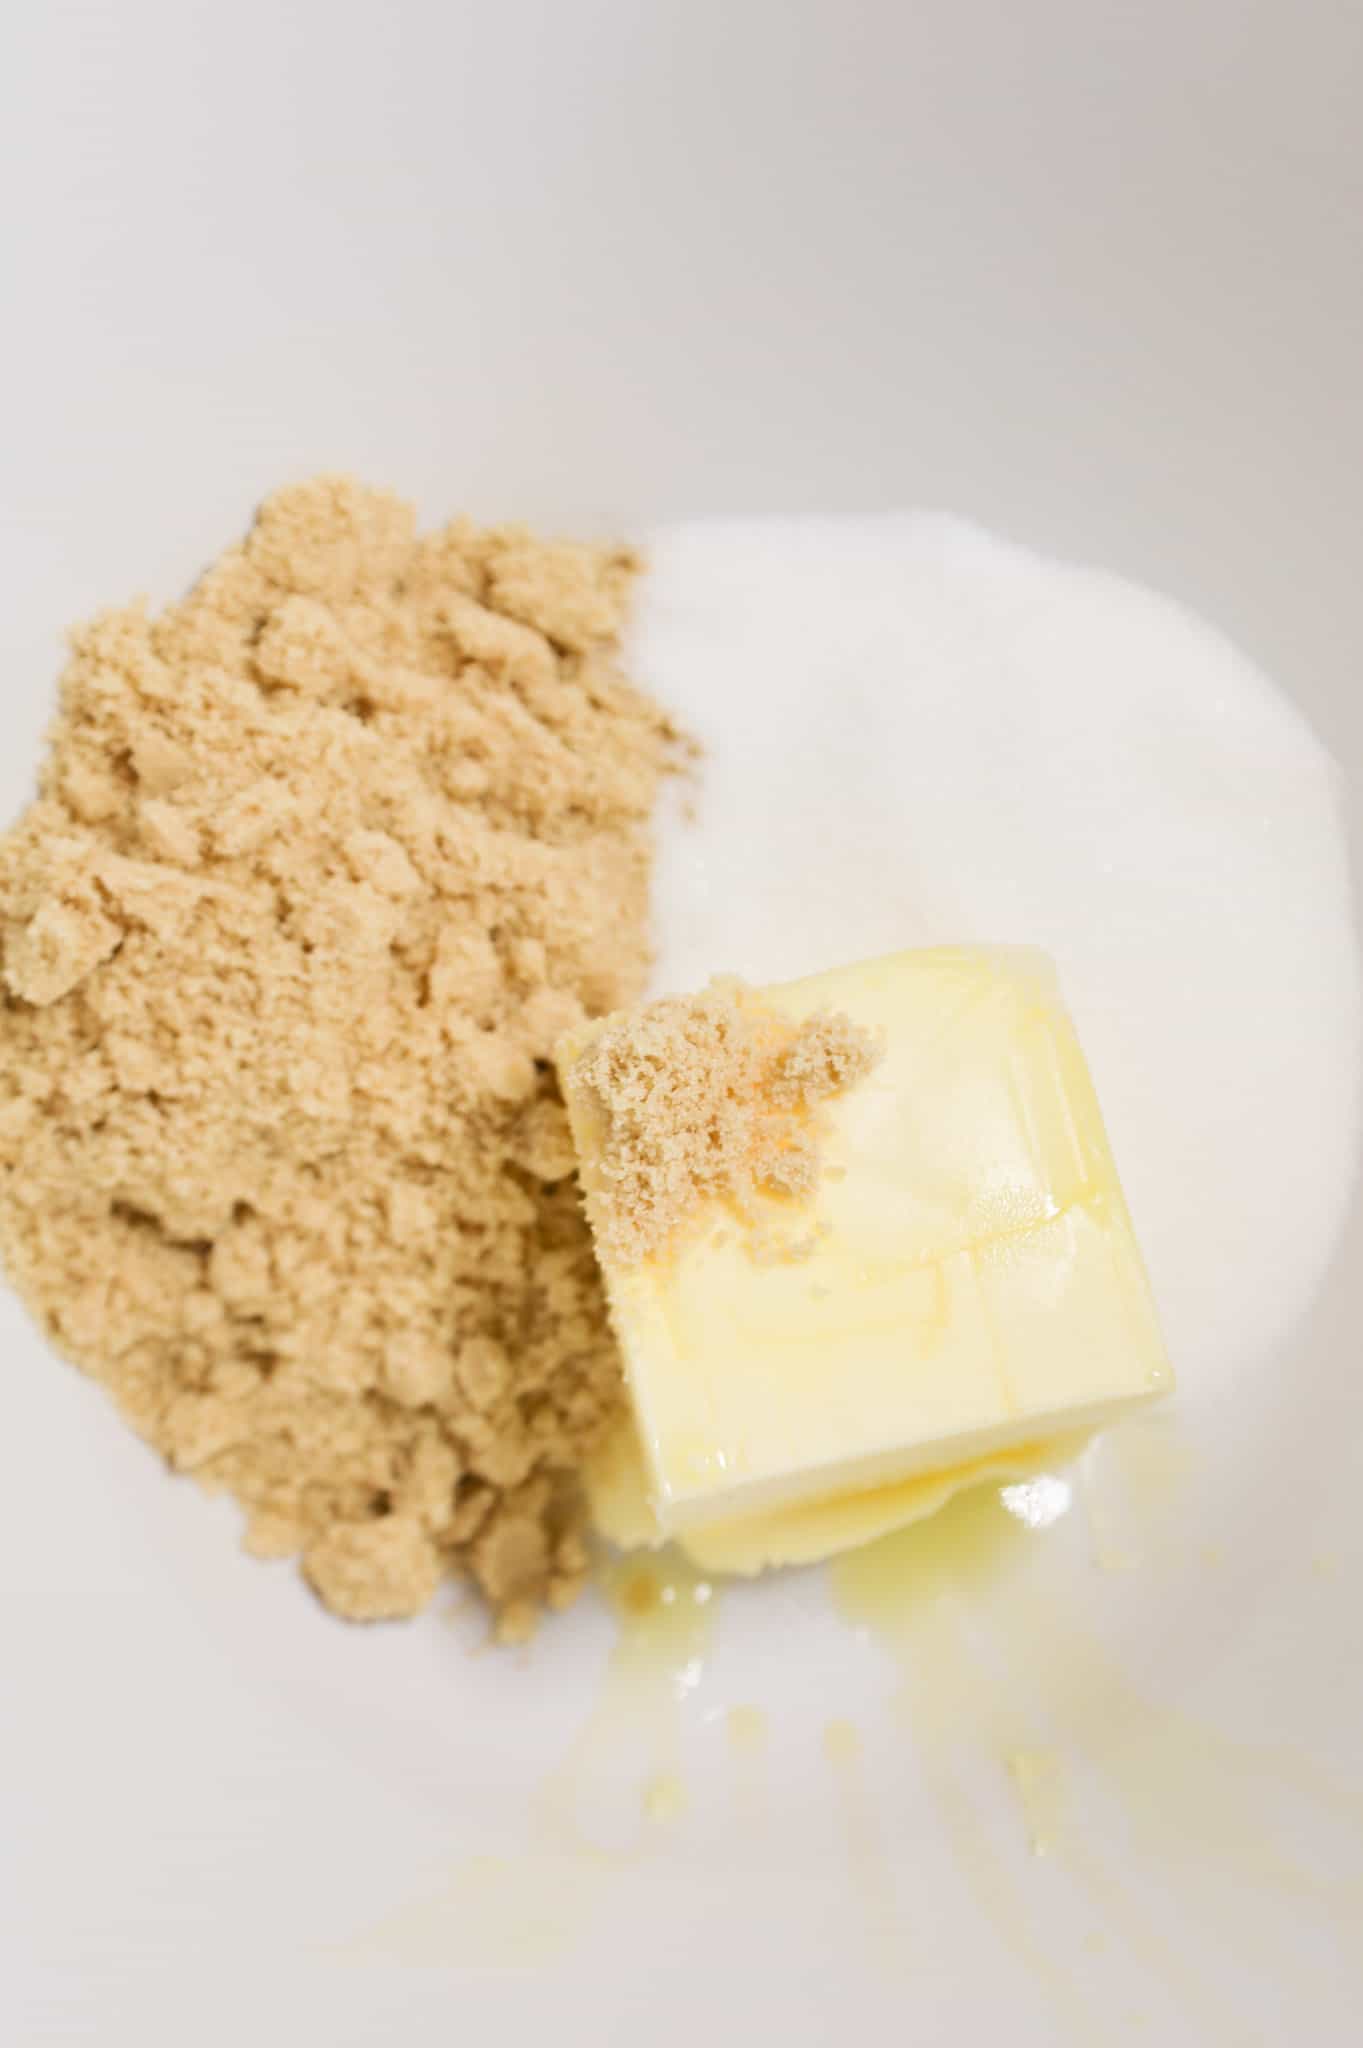 brown sugar, granulated sugar and softened butter in a mixing bowl